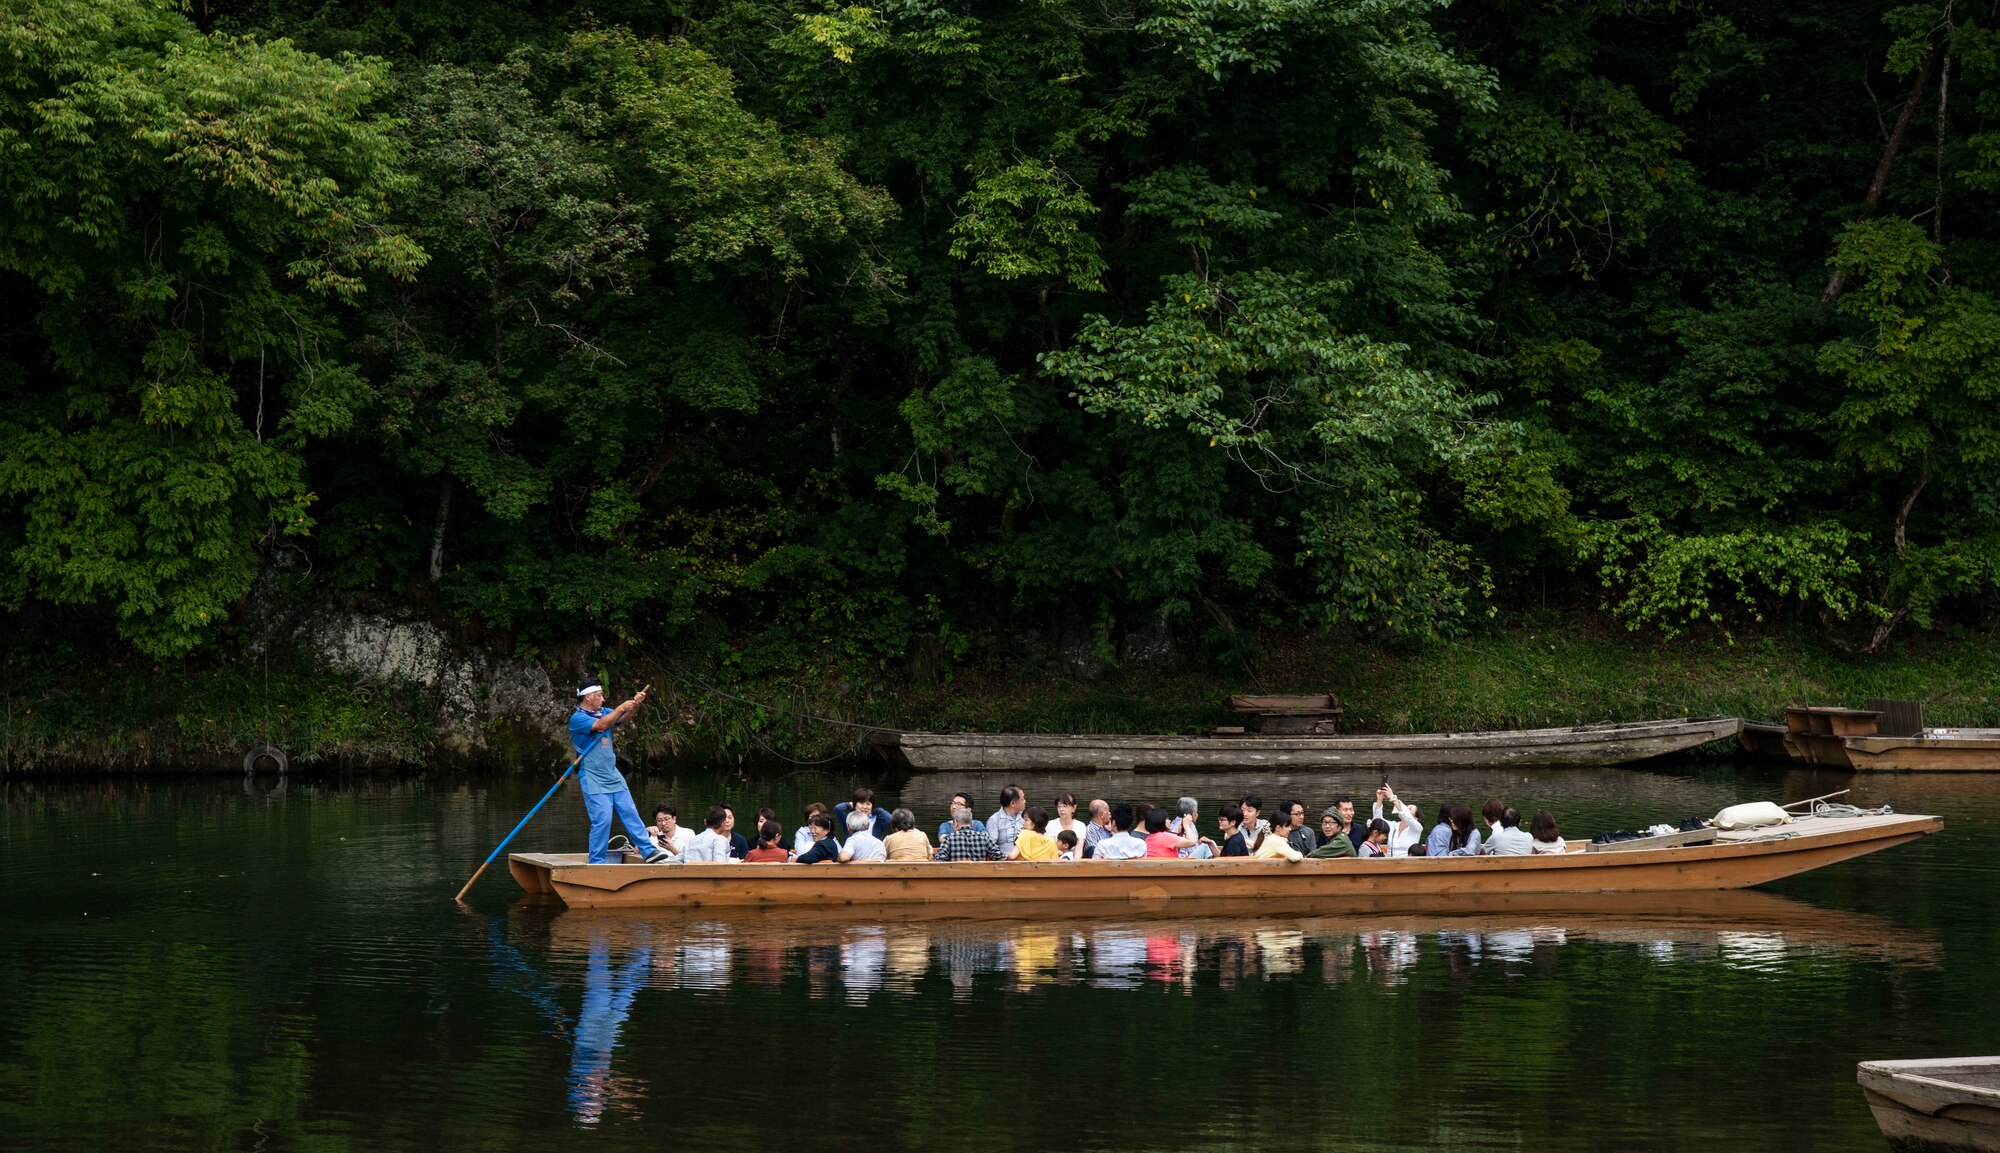 A Japanese boatman pushes visitors on a transportation boat at Geibikei Gorge in Inchinoseki, Japan, Sept. 15, 2018. The boats transport goods across waterways and can hold up to approximately 40 people. The 35th Fighter Wing Chapel initiated trips to local areas in Japan in order to thank service members and their families for their edication to their country. (U.S. Air Force photo by Senior Airman Sadie Colbert)